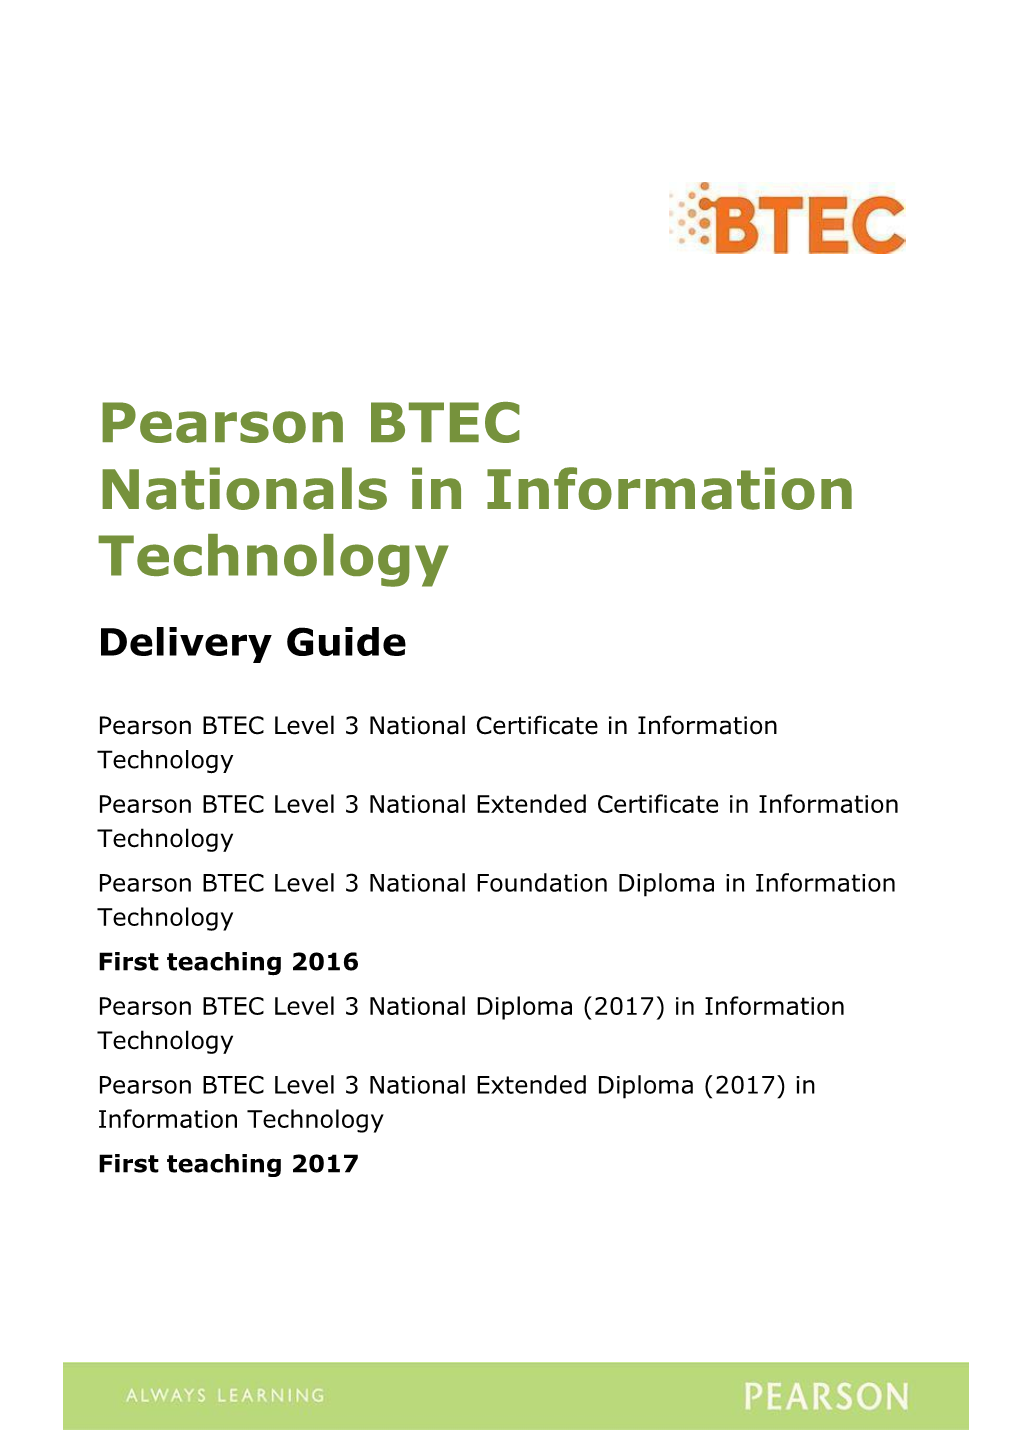 Pearson BTEC Nationals in Information Technology